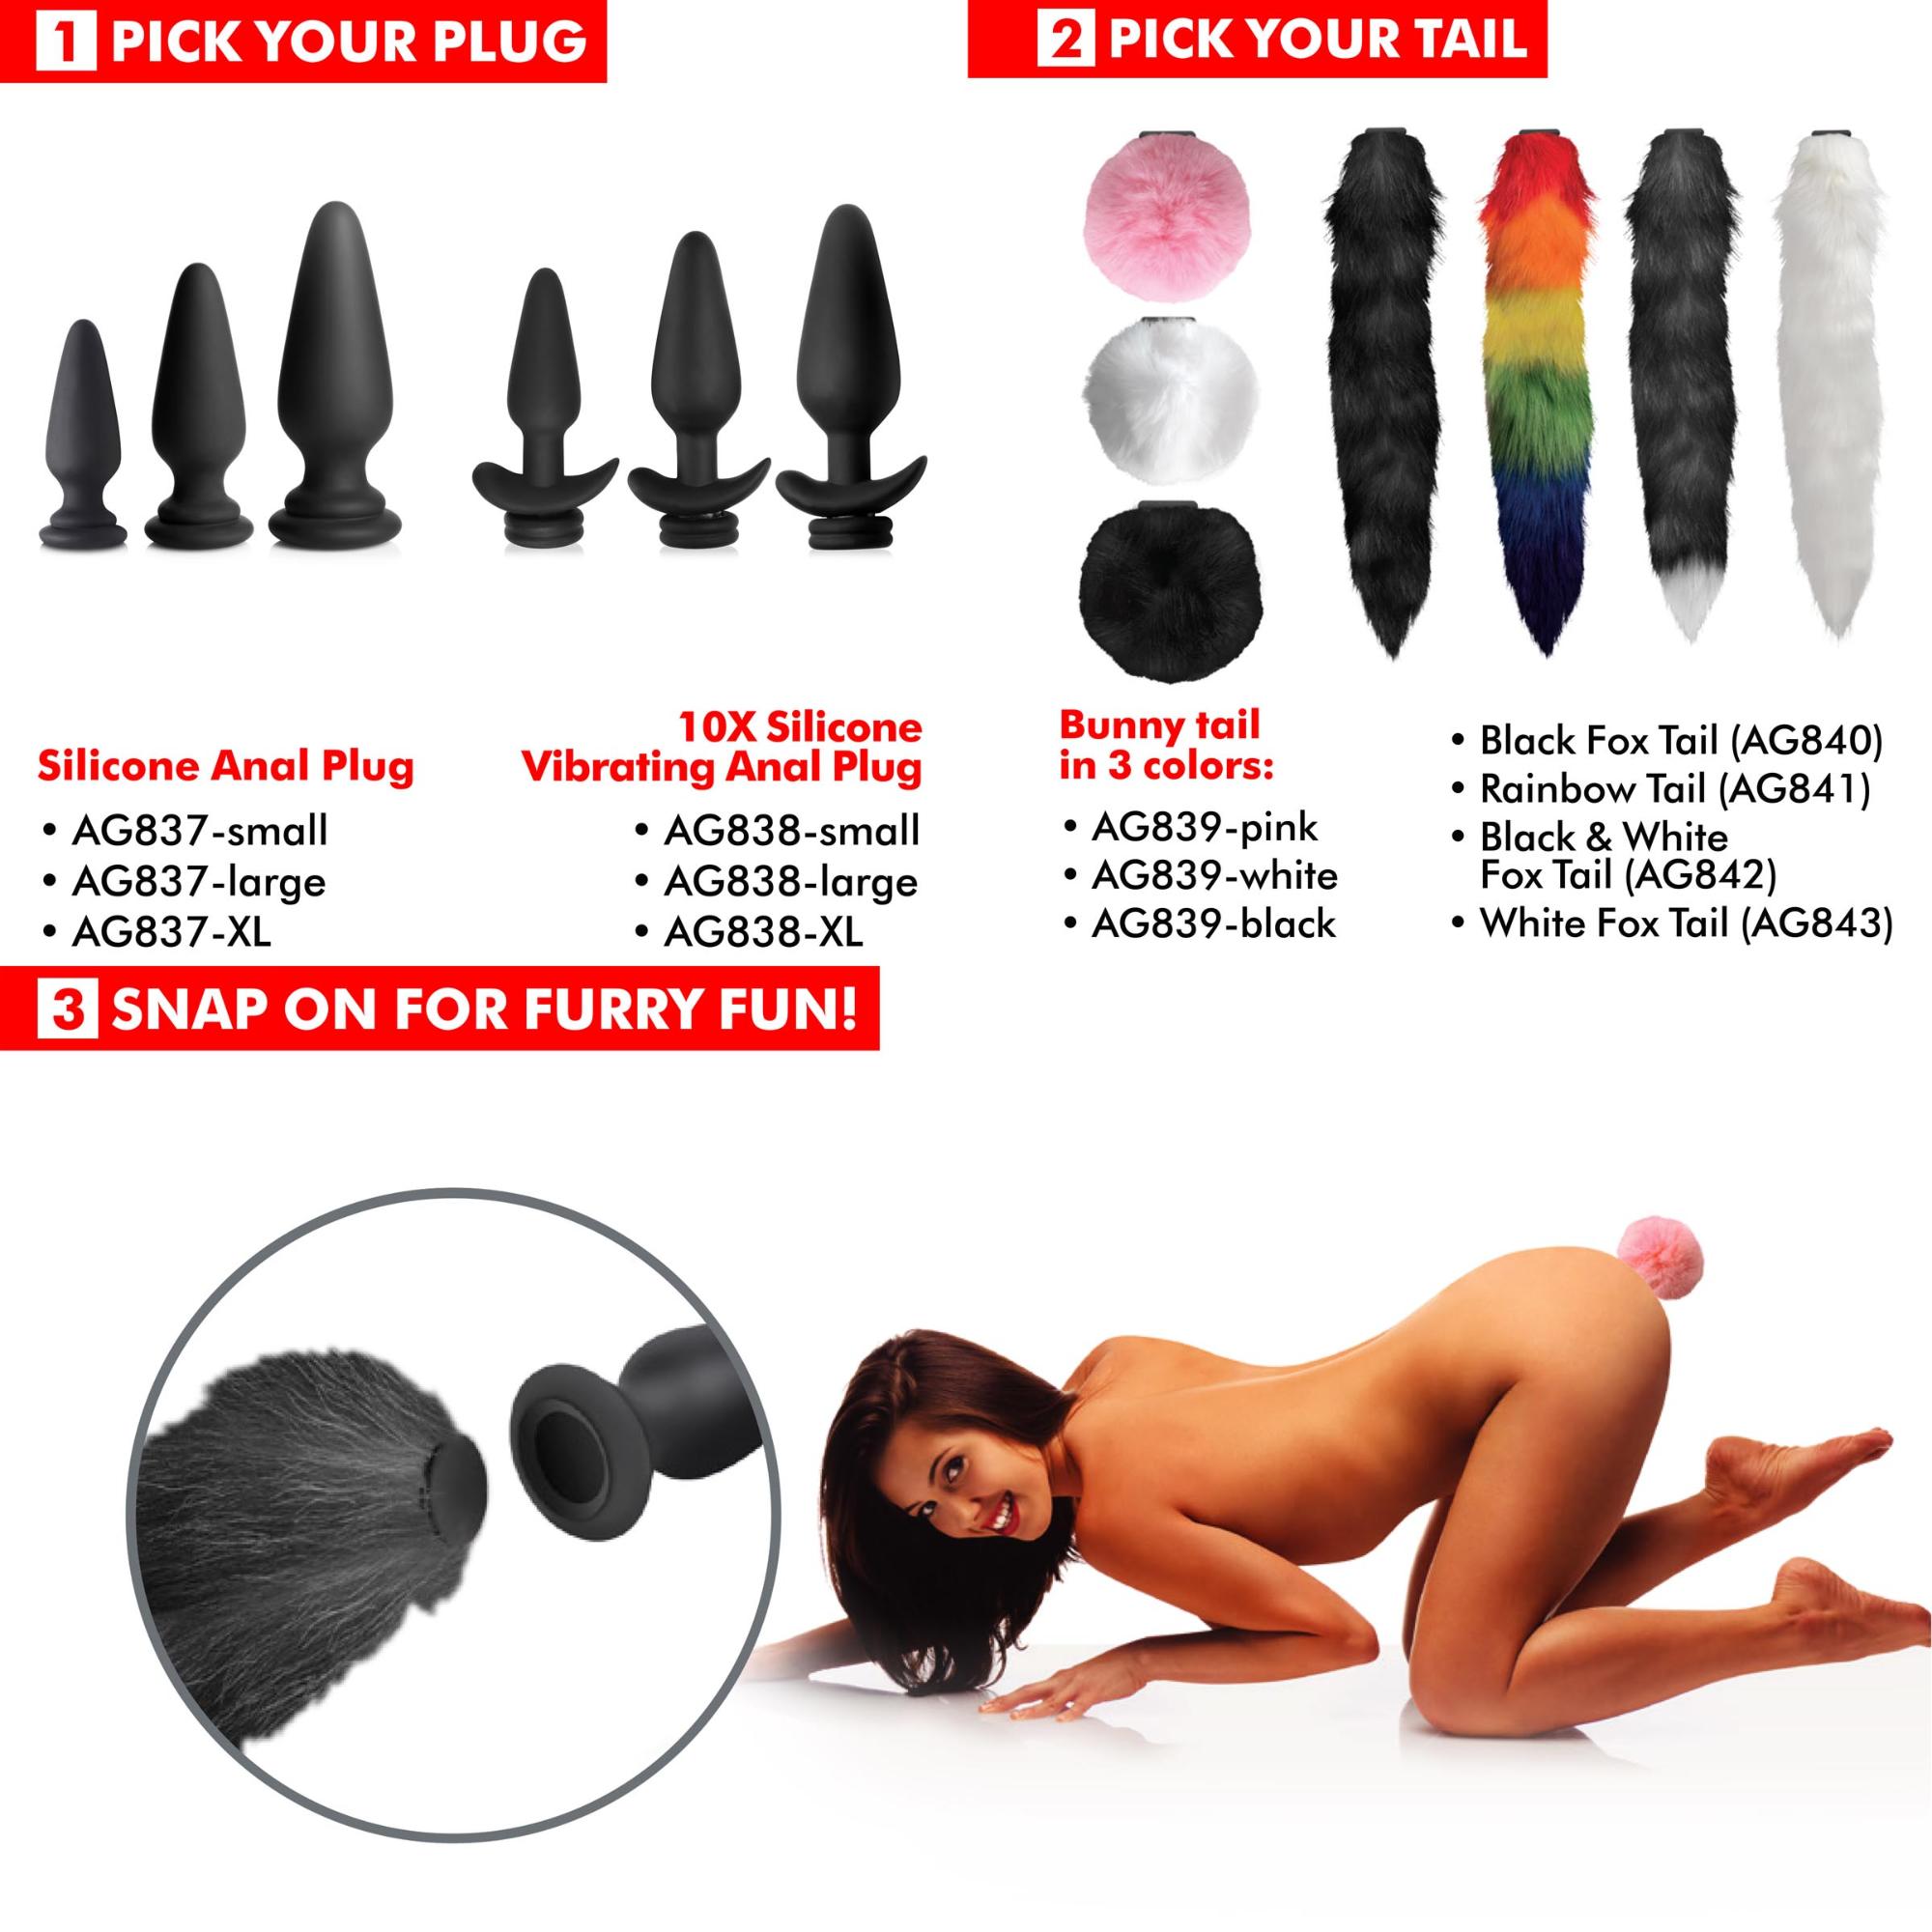 Tailz Snap-On Interchangeable 10X Vibrating Large Silicone Anal Plug with Remote